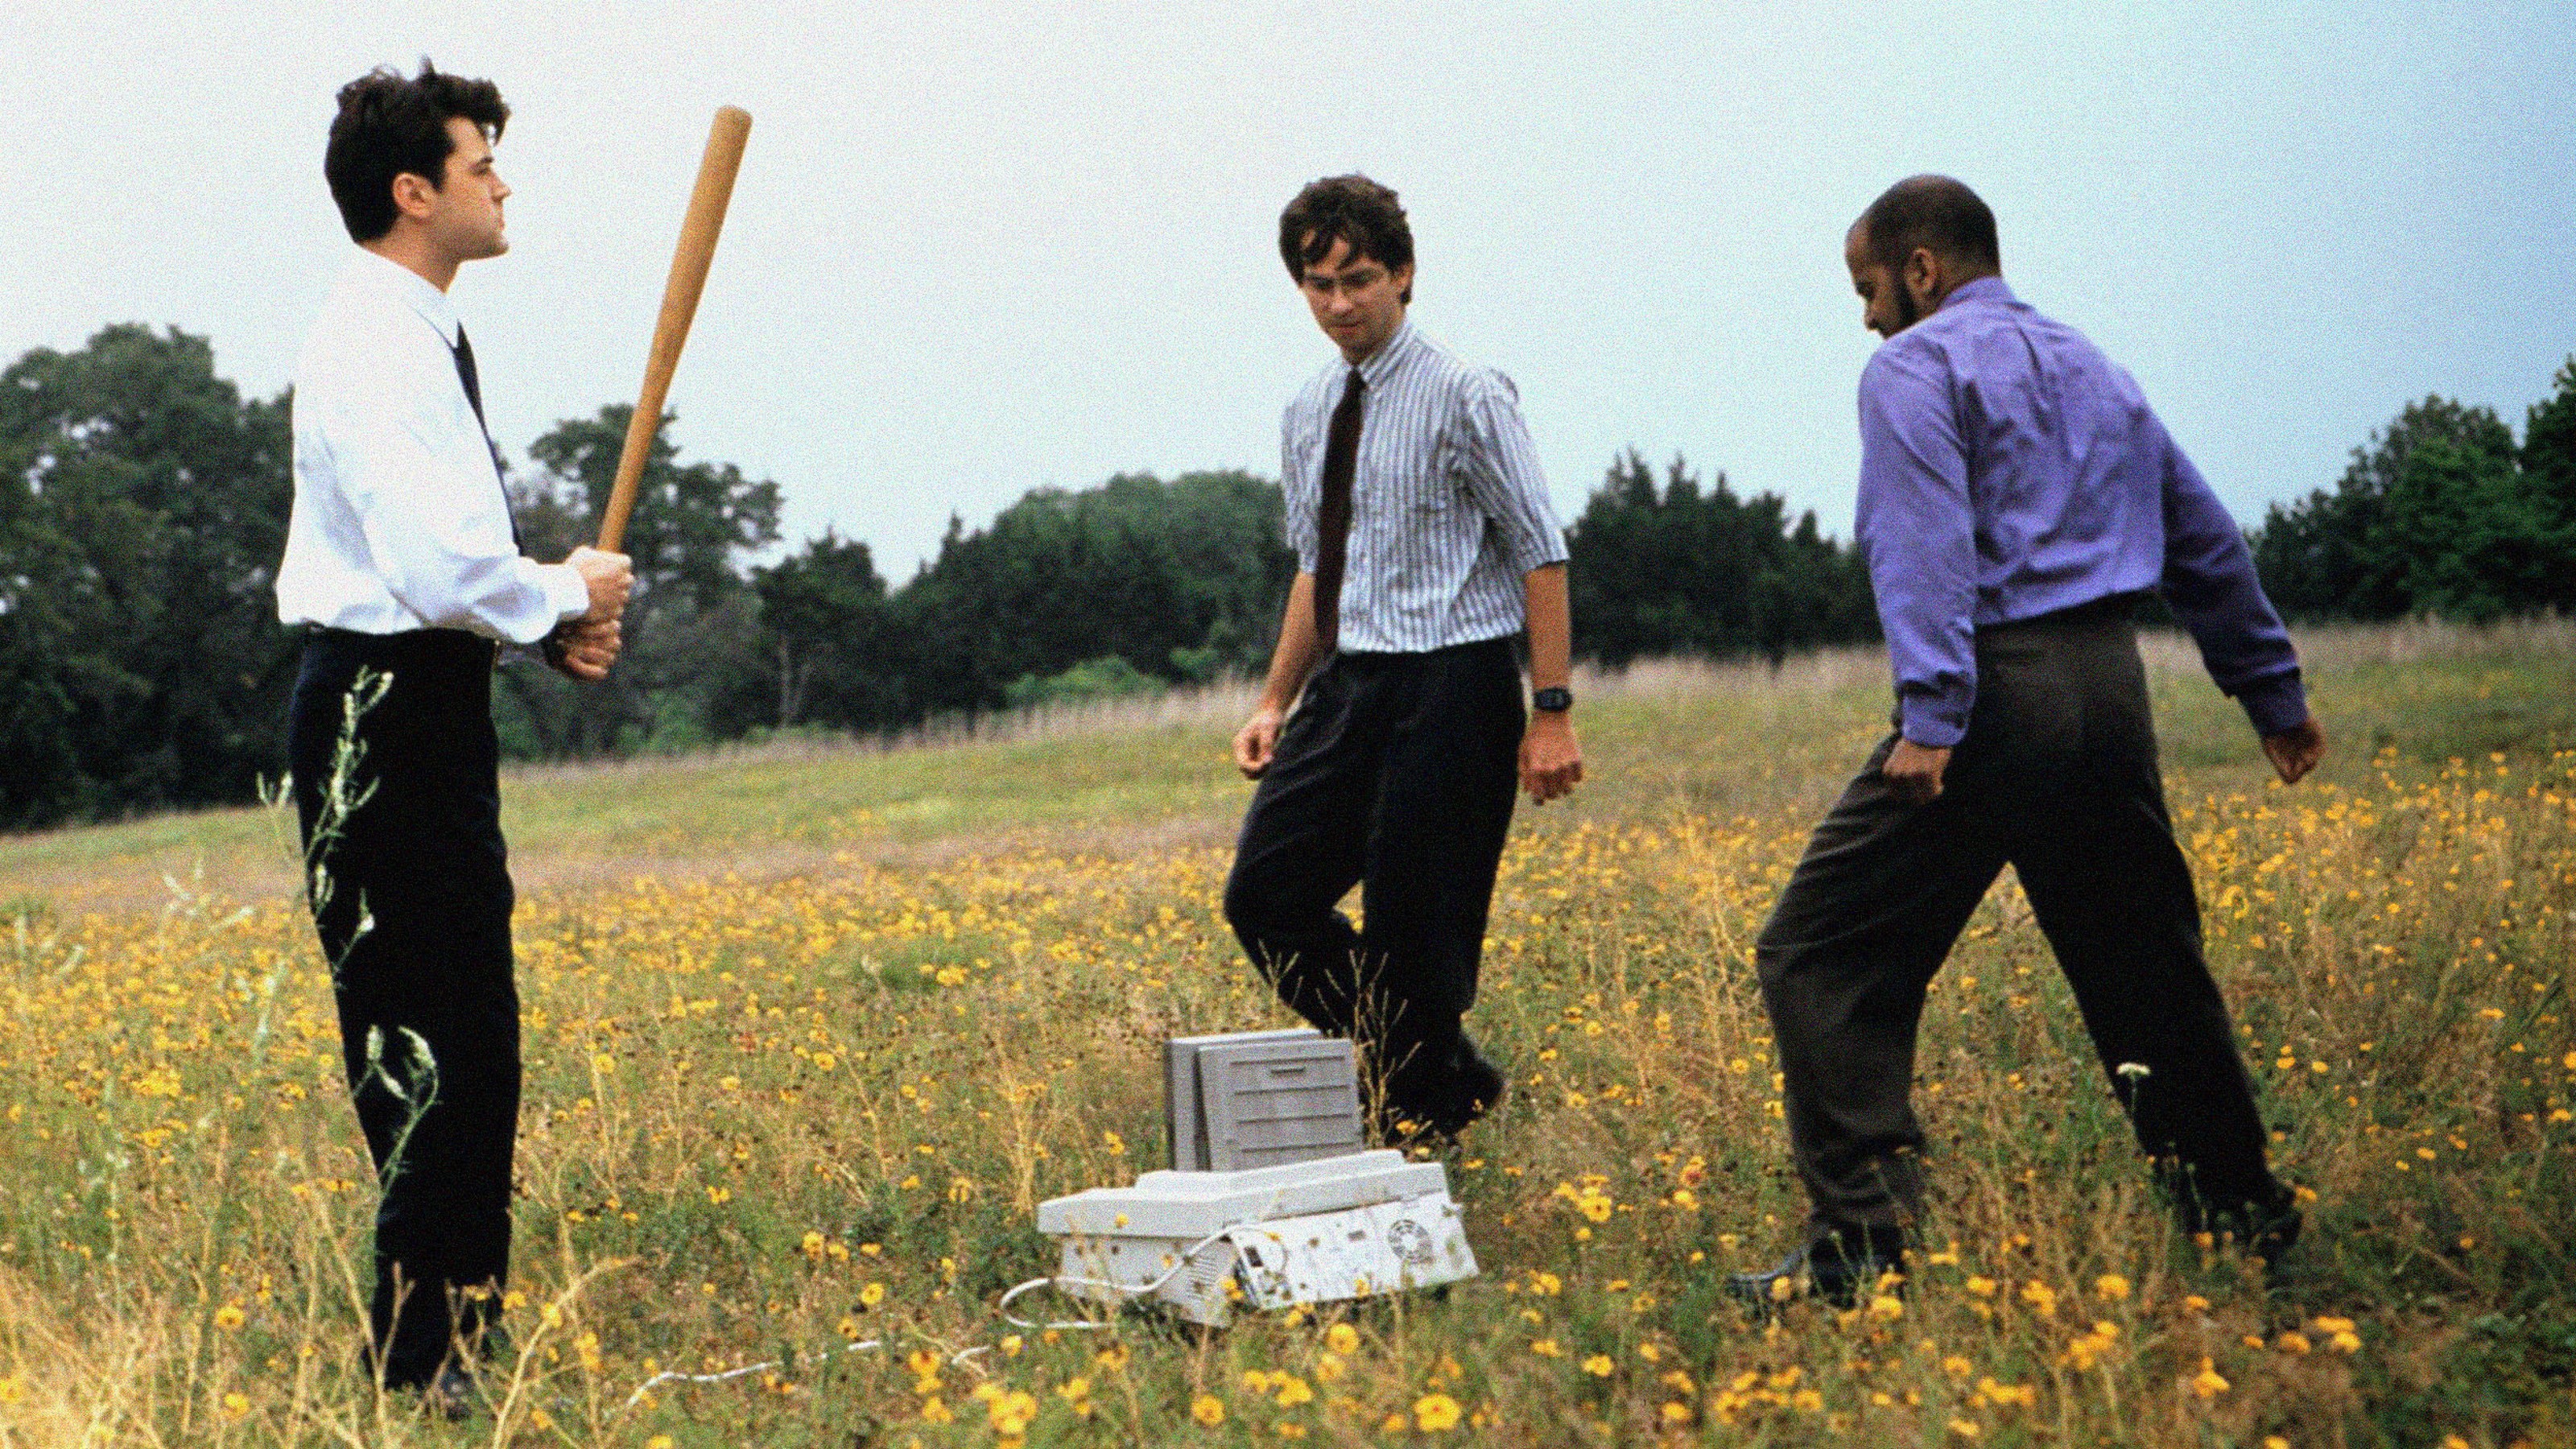 Three men in business attire standing in a field, one holding a baseball bat, next to a damaged printer or computer.